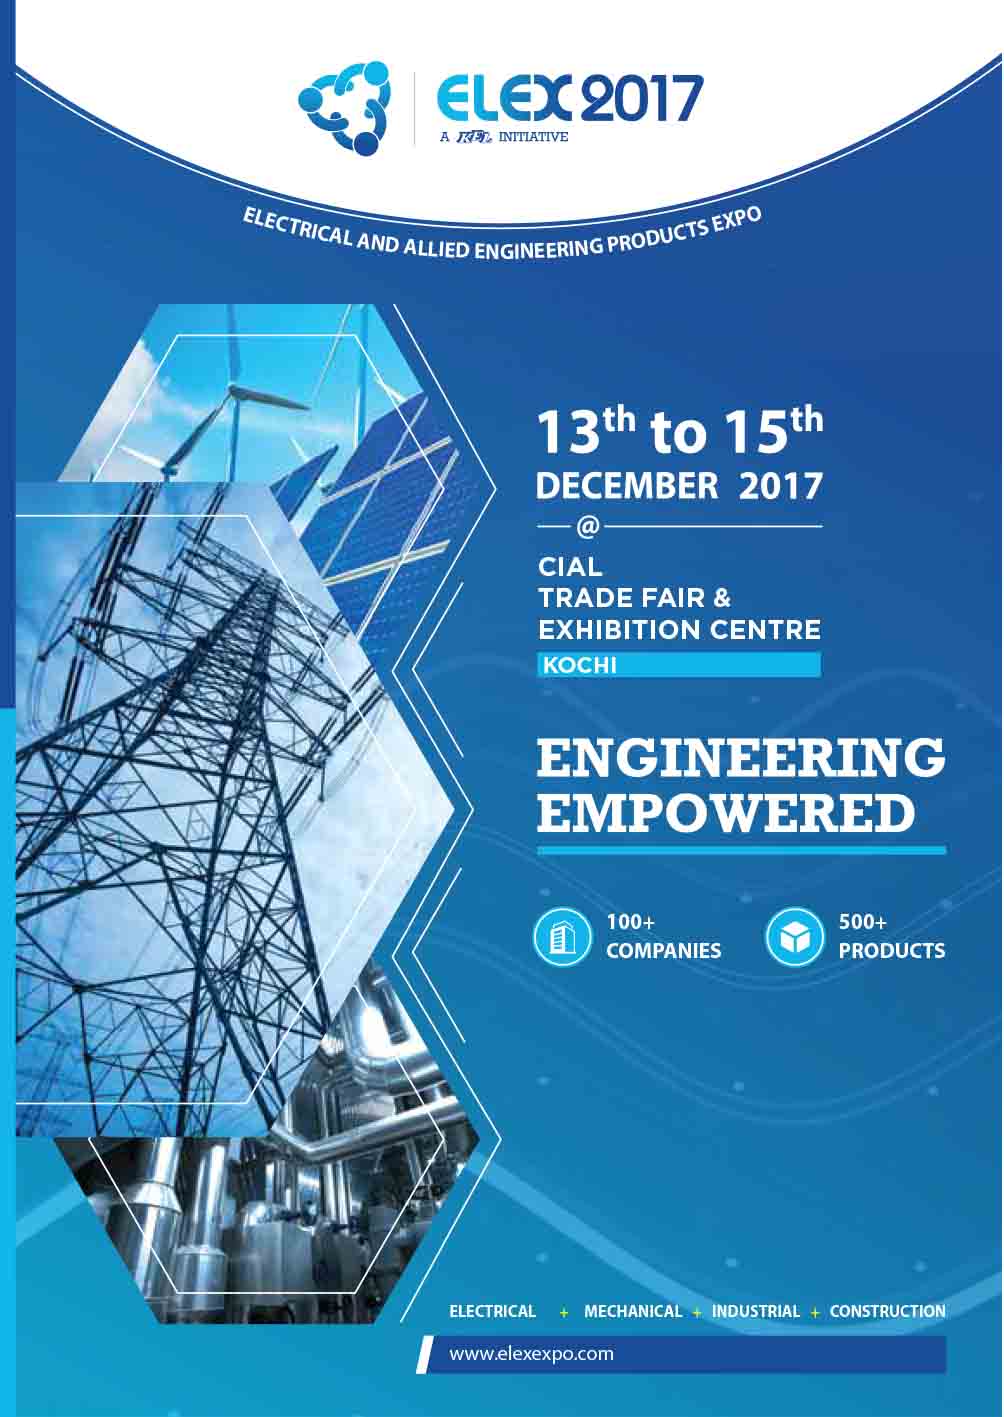 kochi to host elecx electrical engineering exhibition next month